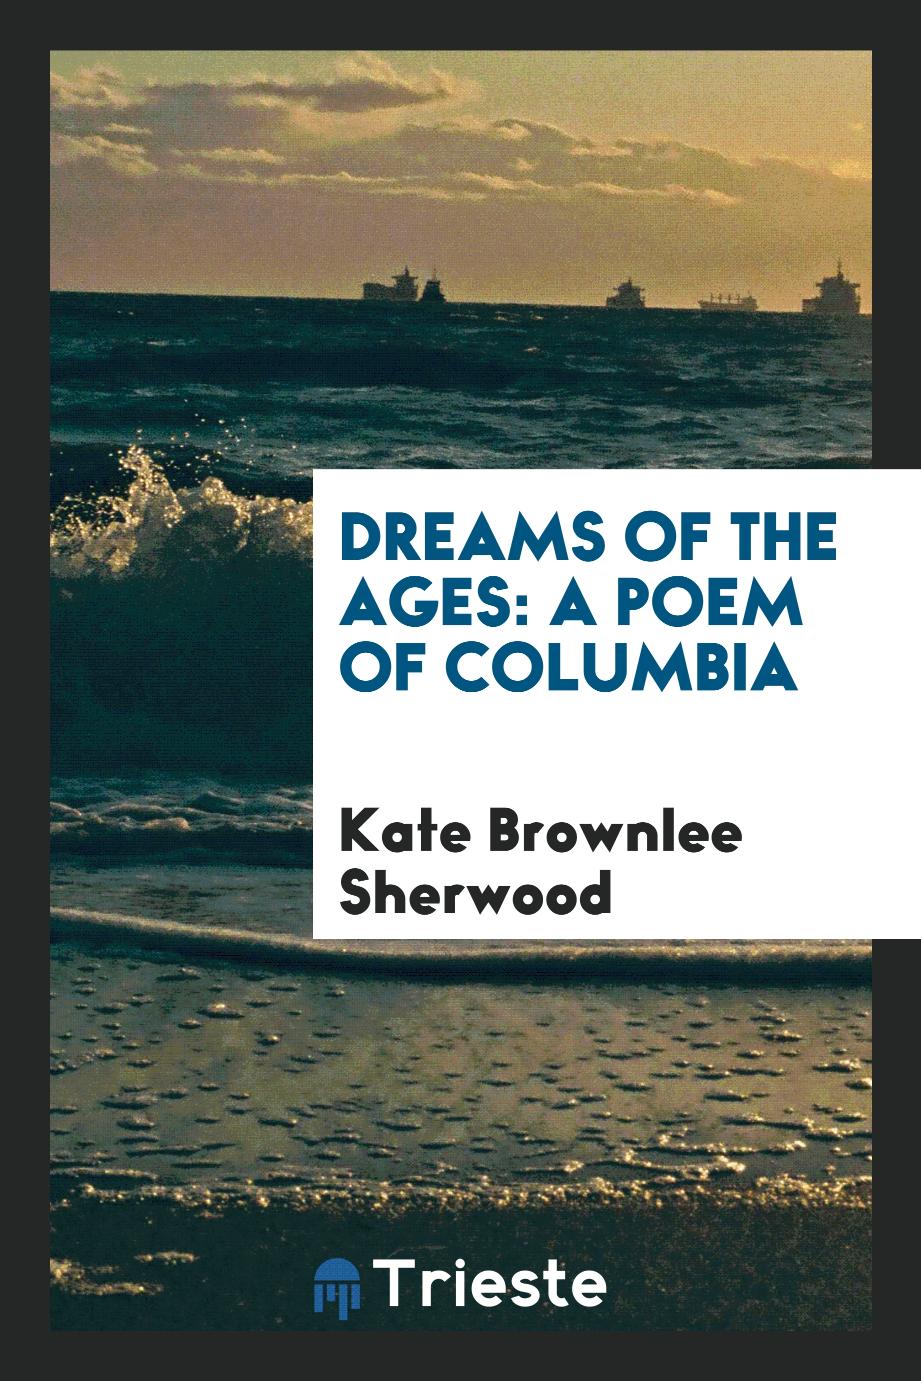 Dreams of the Ages: A Poem of Columbia